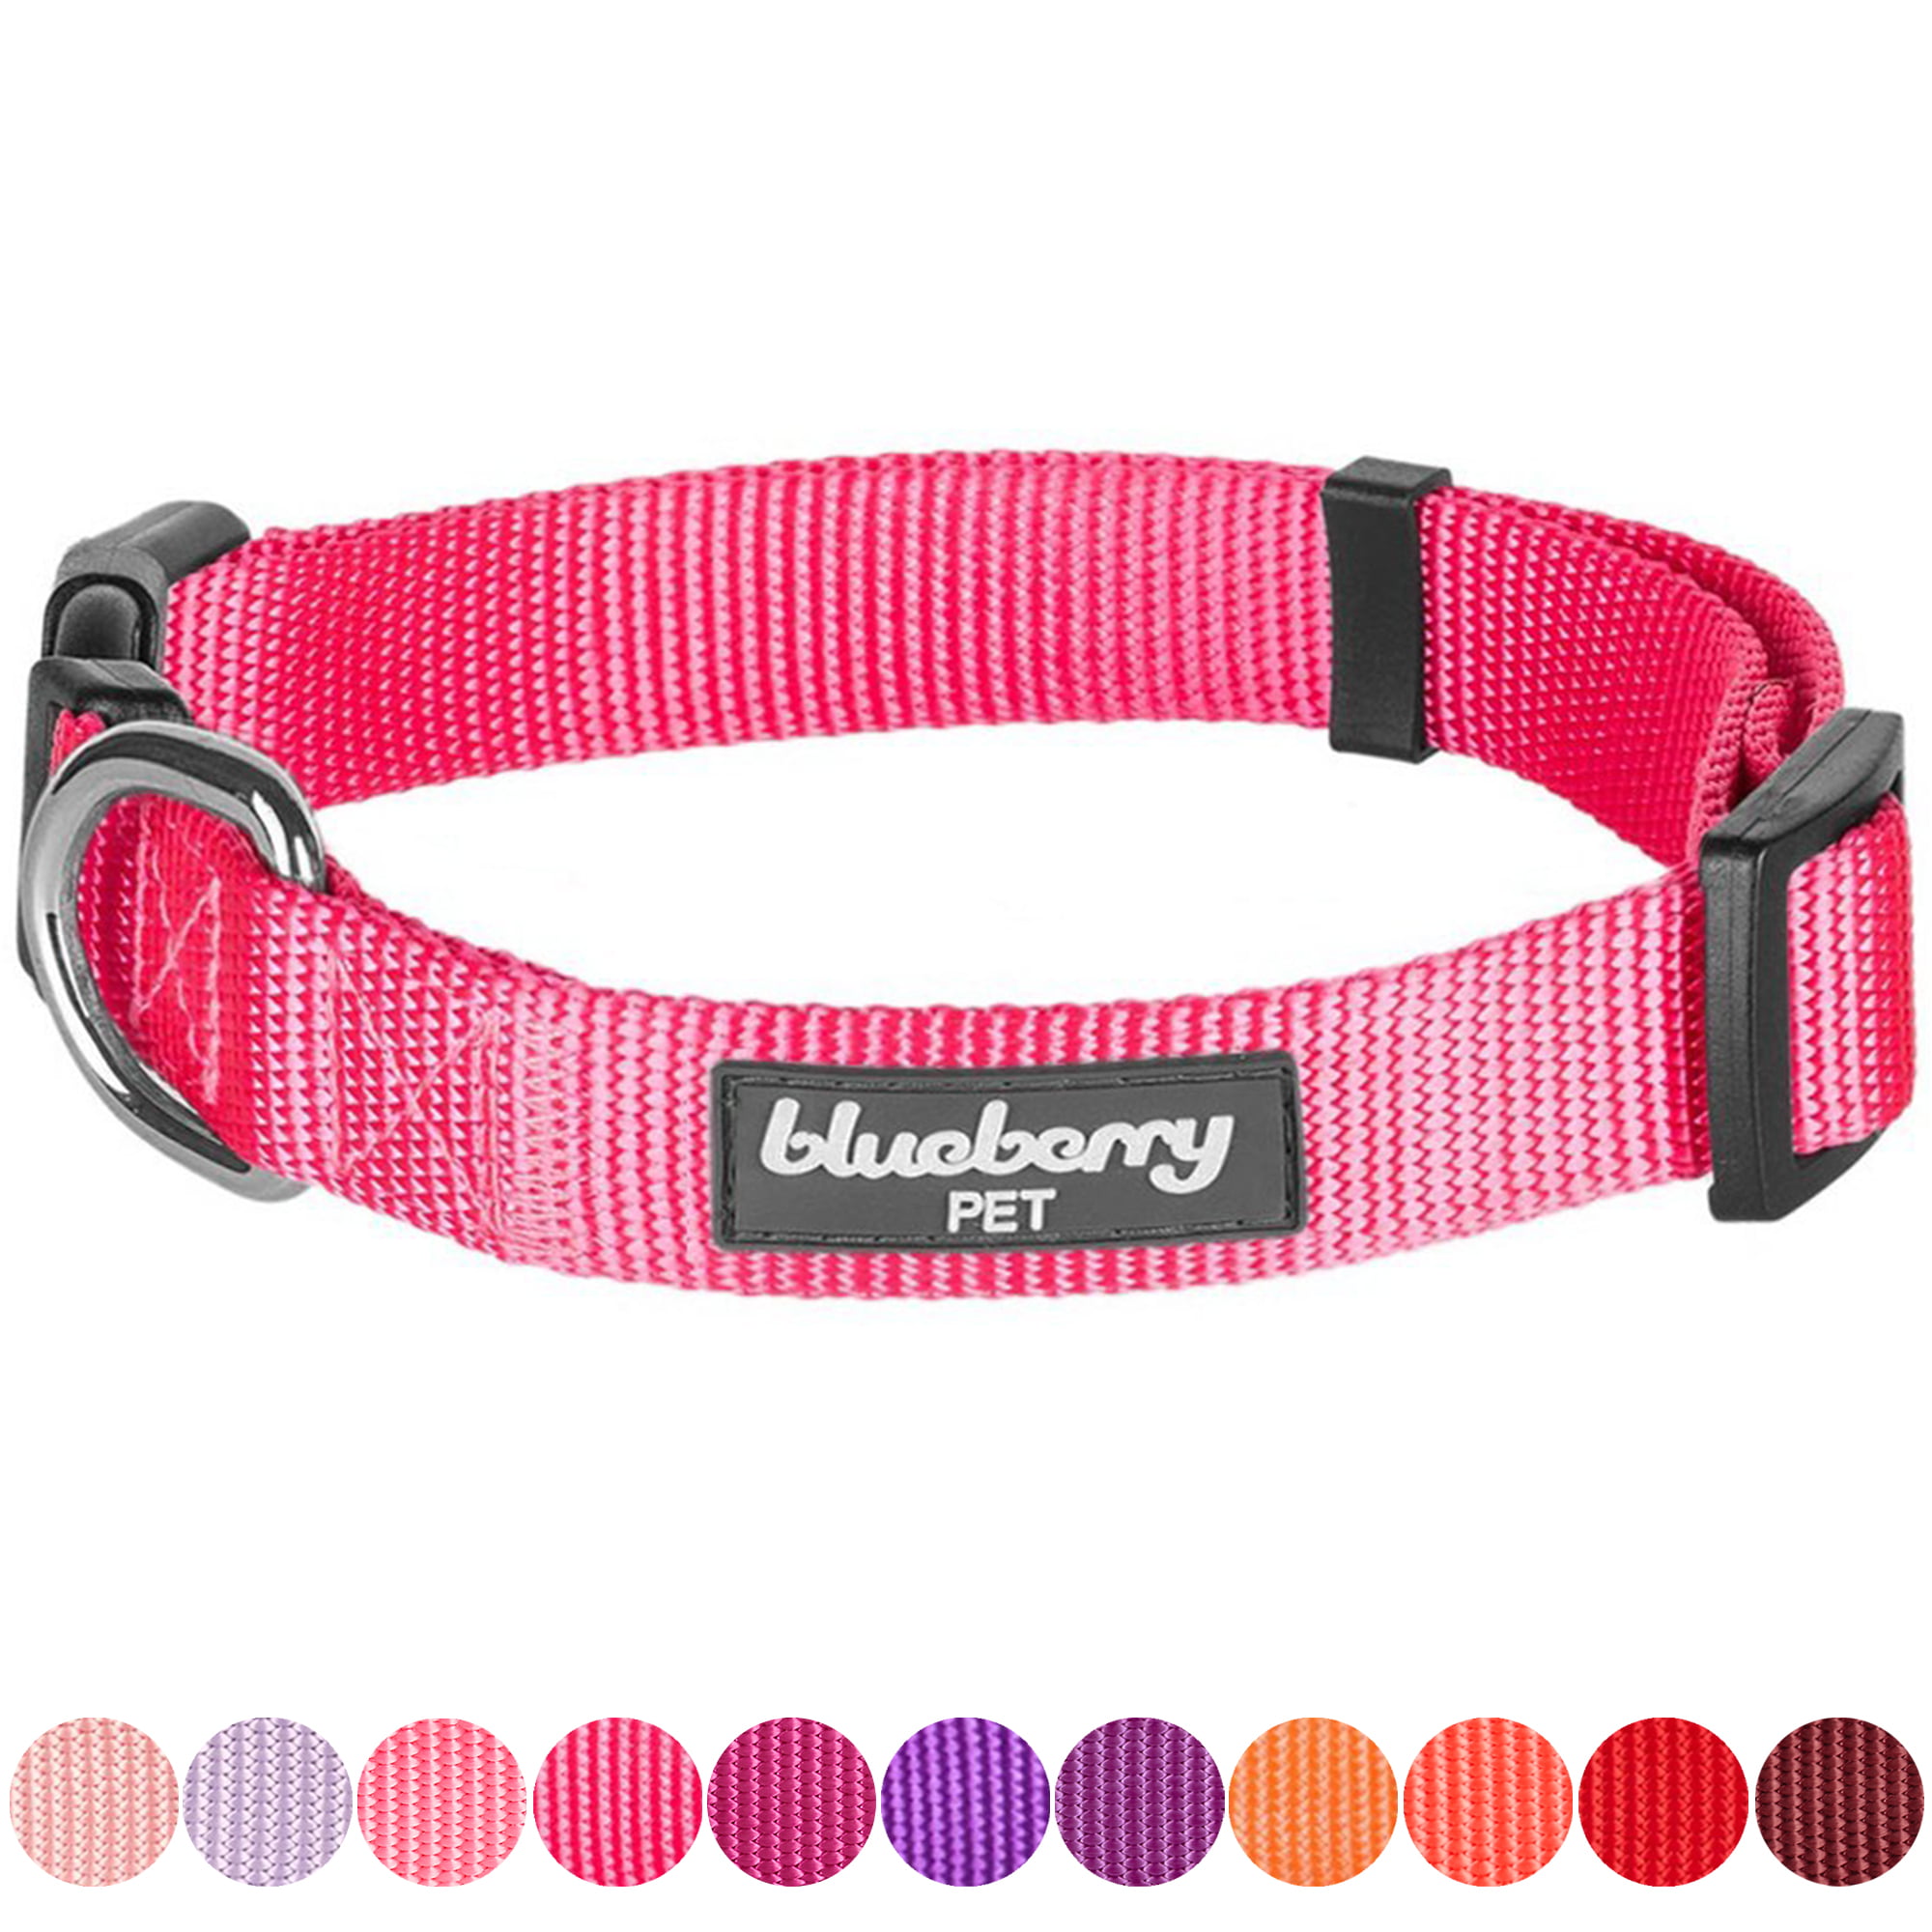 Blueberry Pet Essentials 21 Colors Durable Classic Dog Leash 5 ft x 3/8 X-Small French Pink Basic Nylon Leashes for Puppies